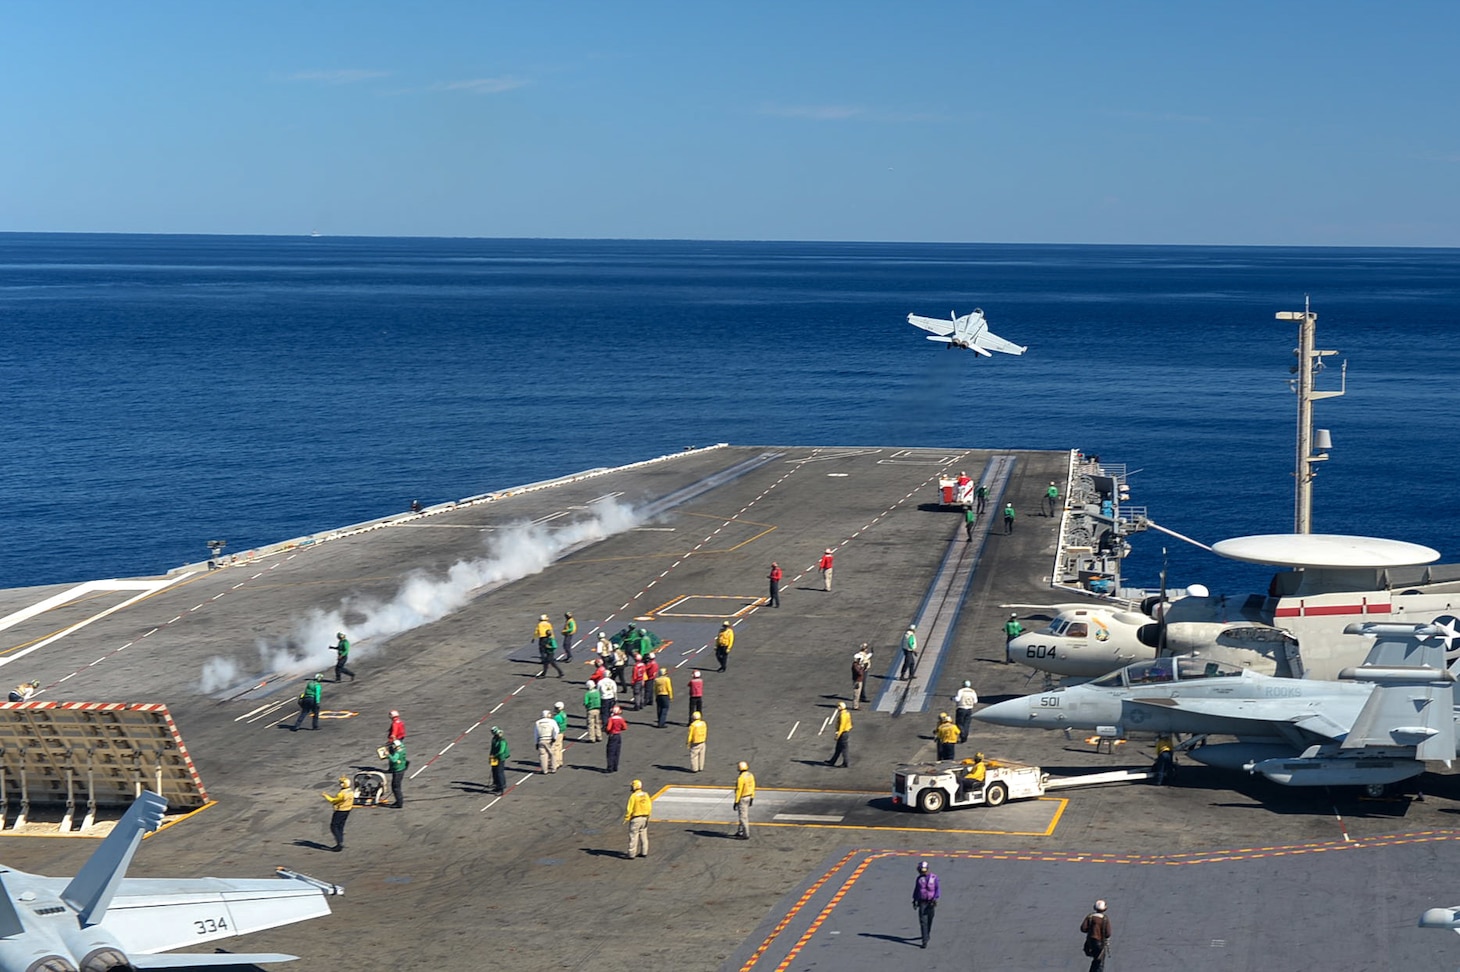 An F/A-18E Super Hornet, attached to the “Blue Blasters” of Strike Fighter Squadron (VFA) 34, launches from the flight deck of the Nimitz-class aircraft carrier USS Harry S. Truman (CVN 75).